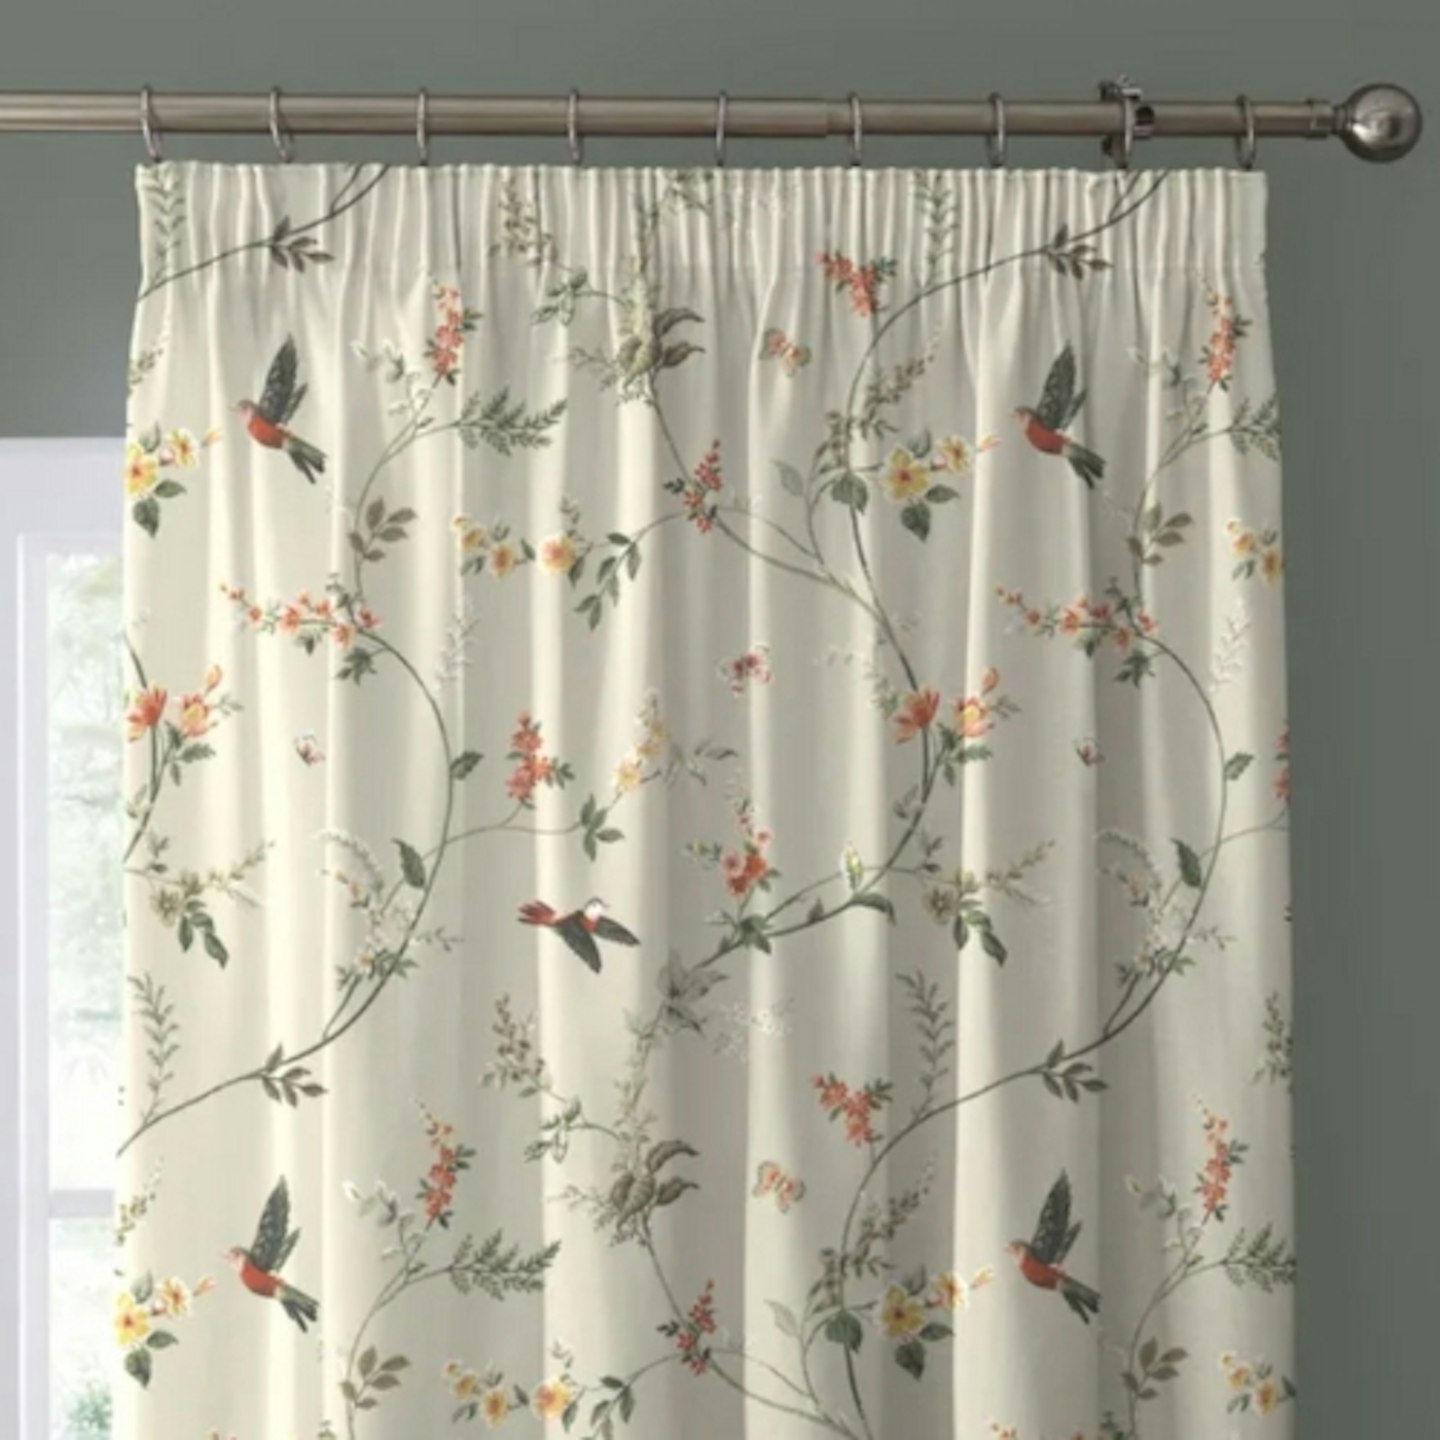 Dunelm Darnley Coral Pencil Pleat Curtains